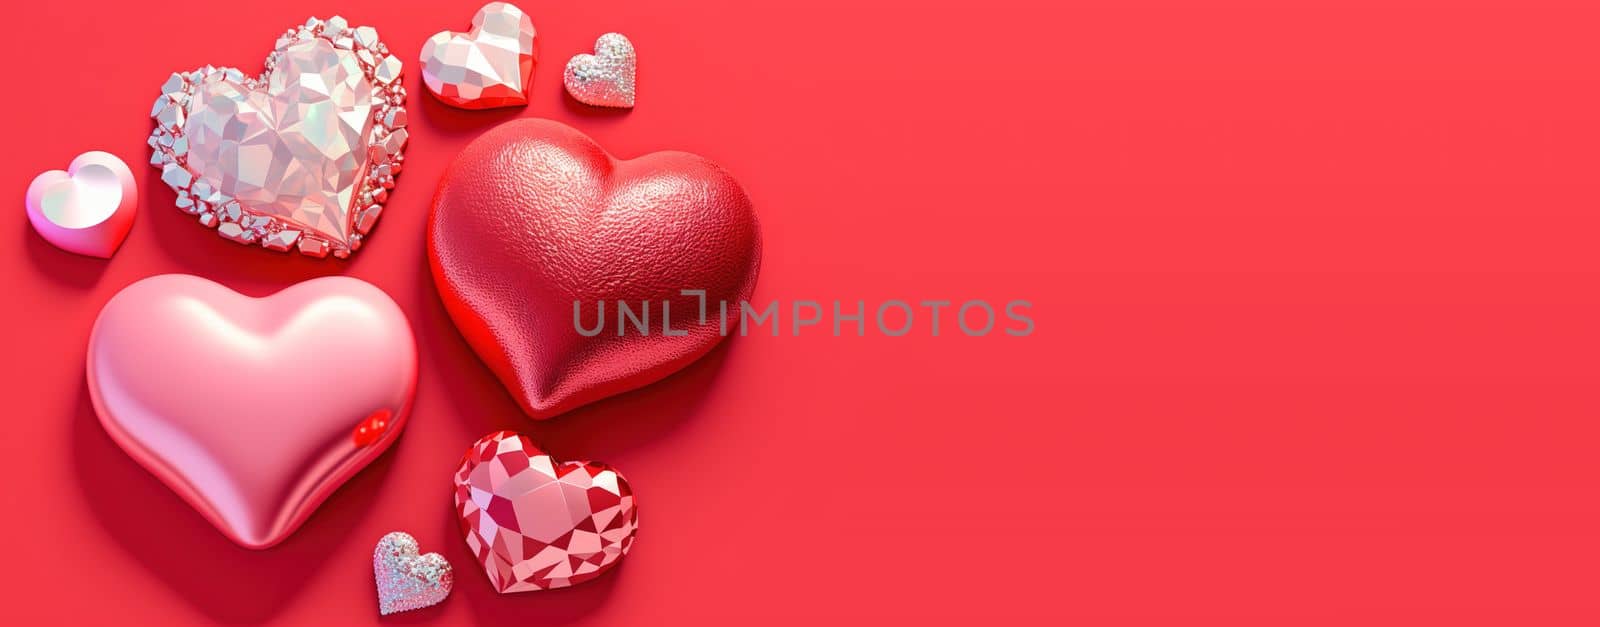 Gleaming 3D Heart, Diamond, and Crystal Illustration for Valentine's Day Banner by templator